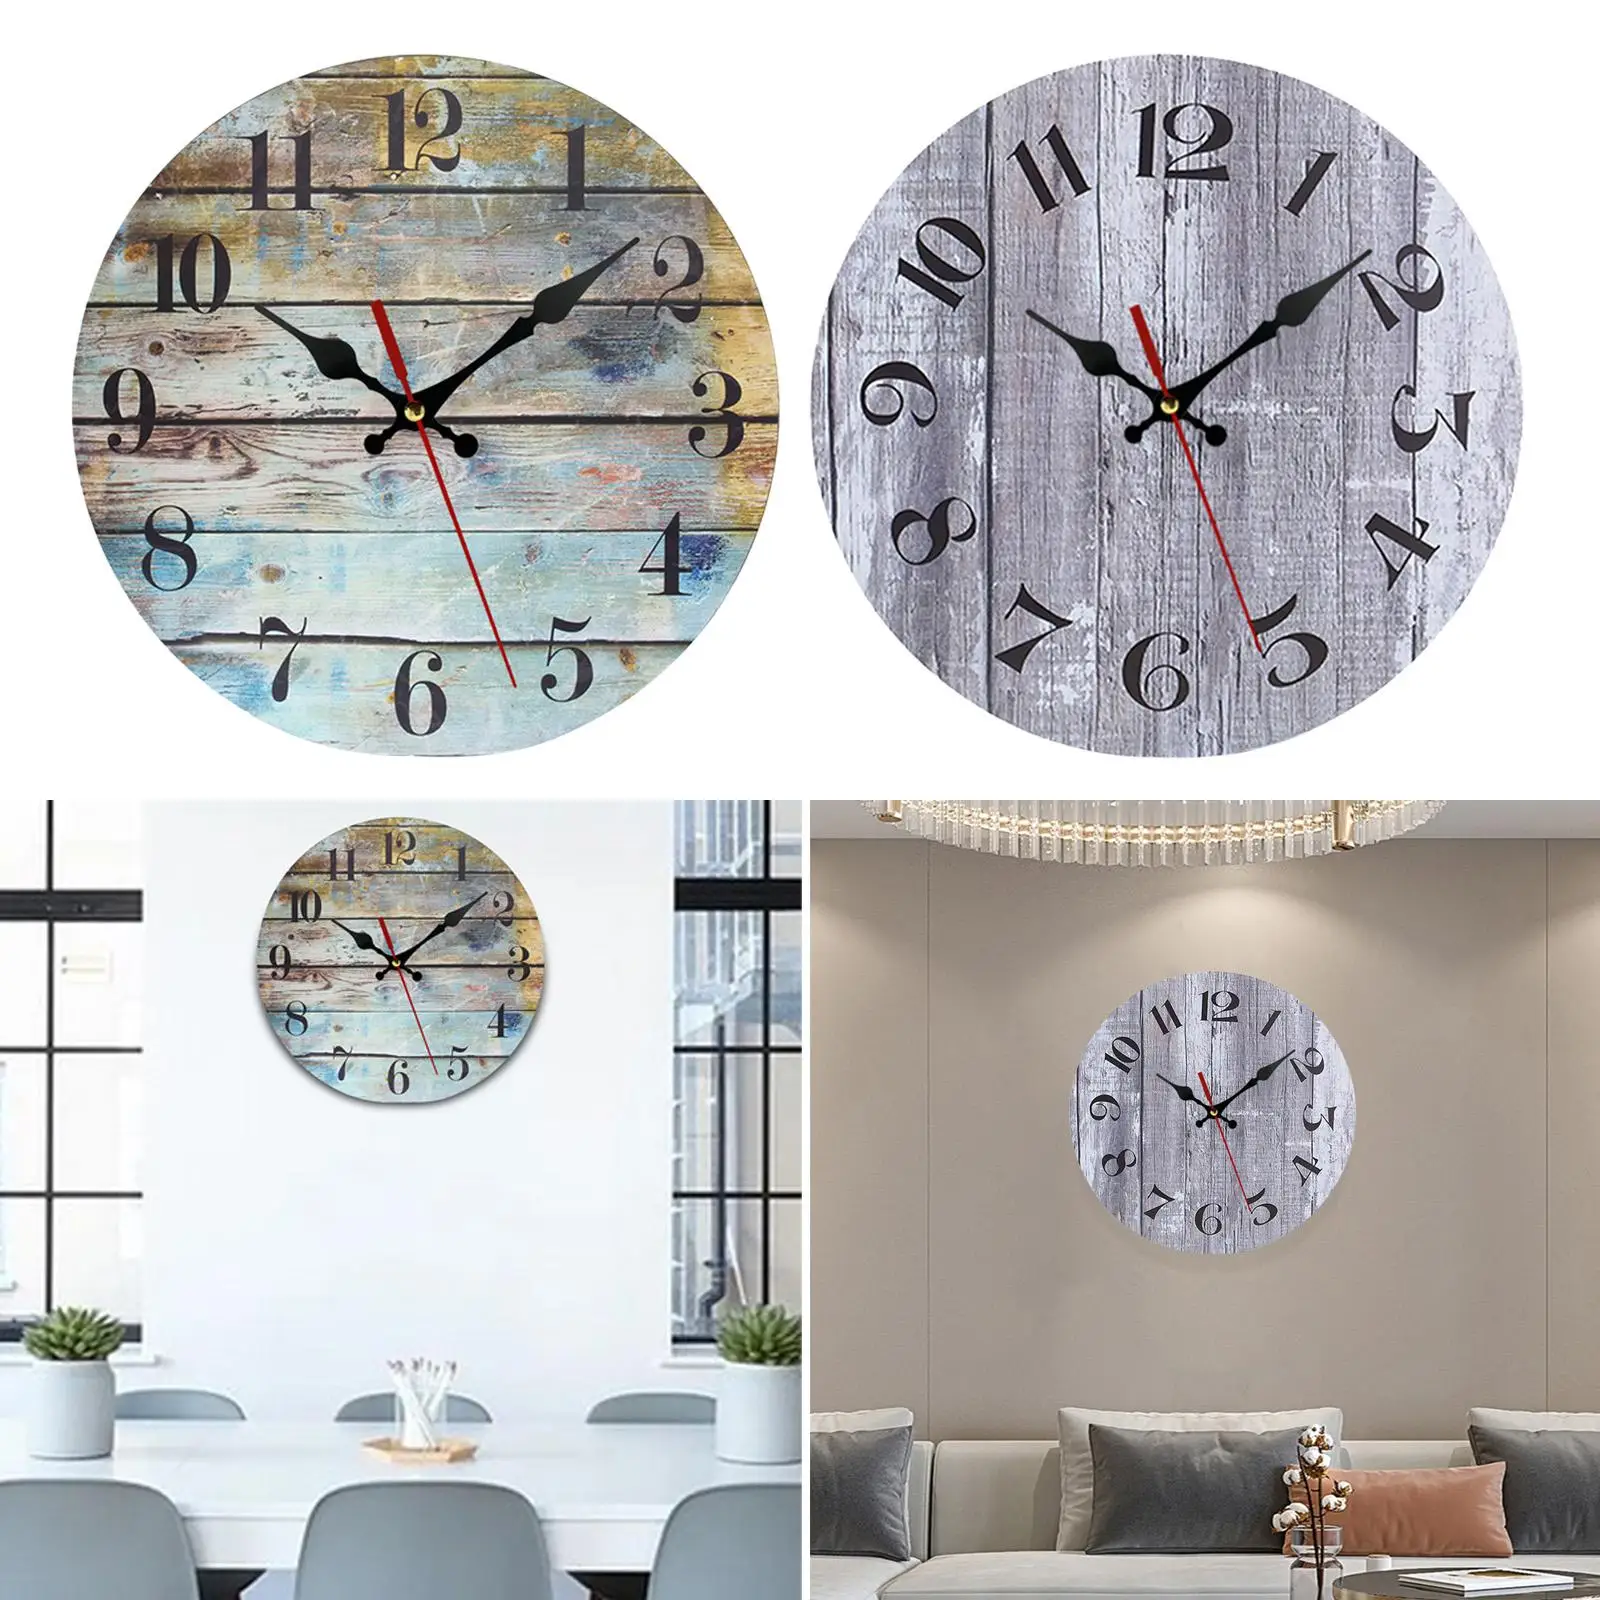 25cm Wood Wall Clock Wooden Decorative Watches Non Ticking Silent Rustic Hanging Clocks for Living Room Bedside Bathroom Home